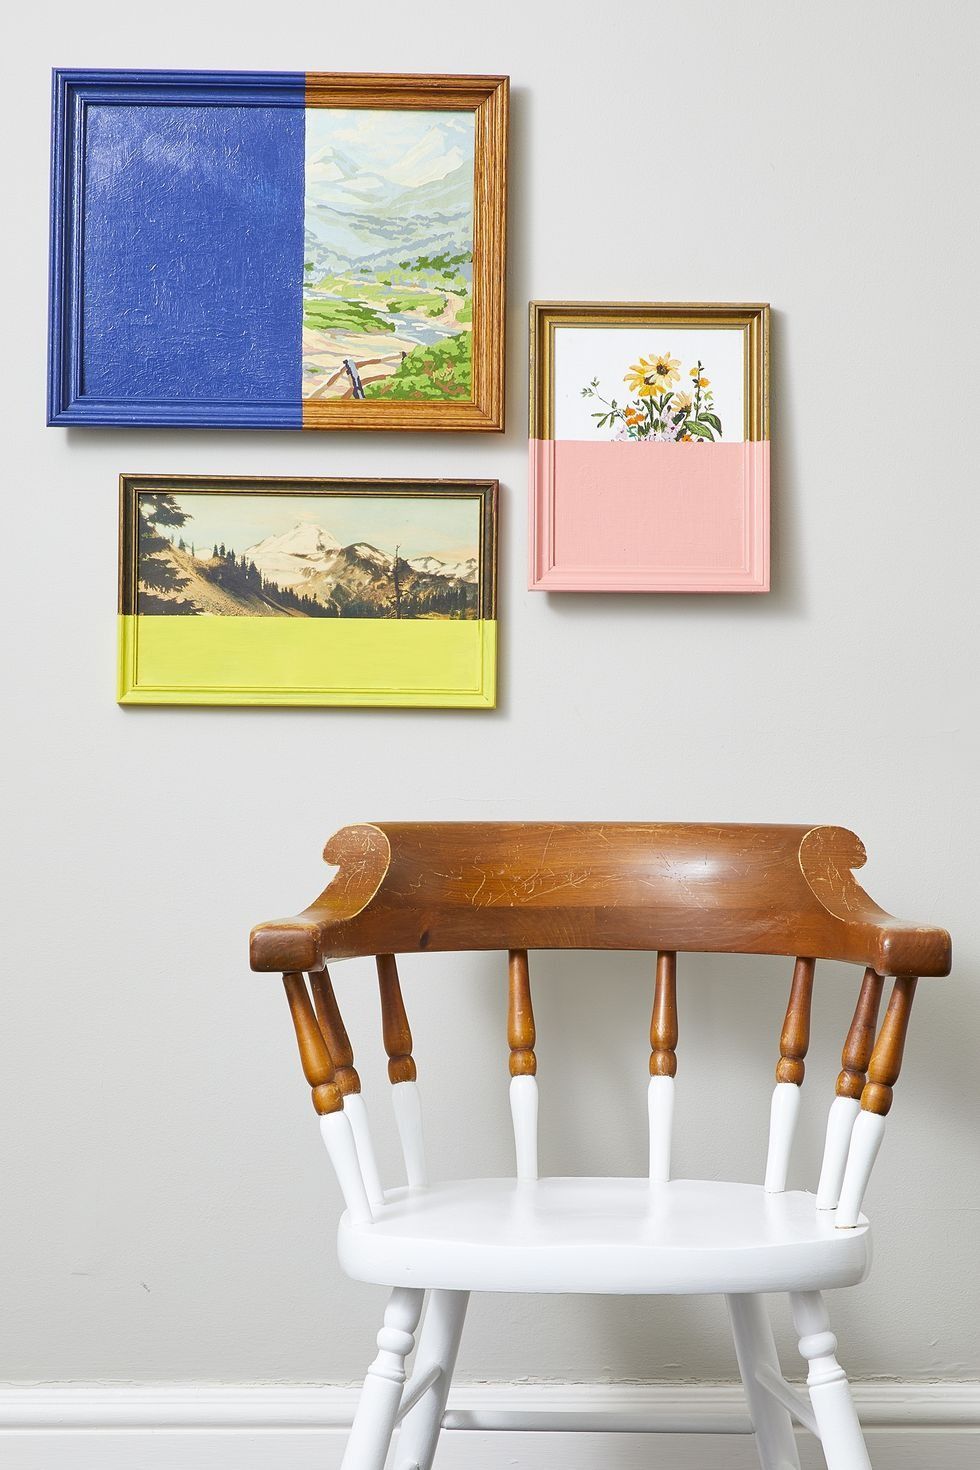 family photo wall ideas, a wall with half painted artworks and a chair painted in white at the bottom